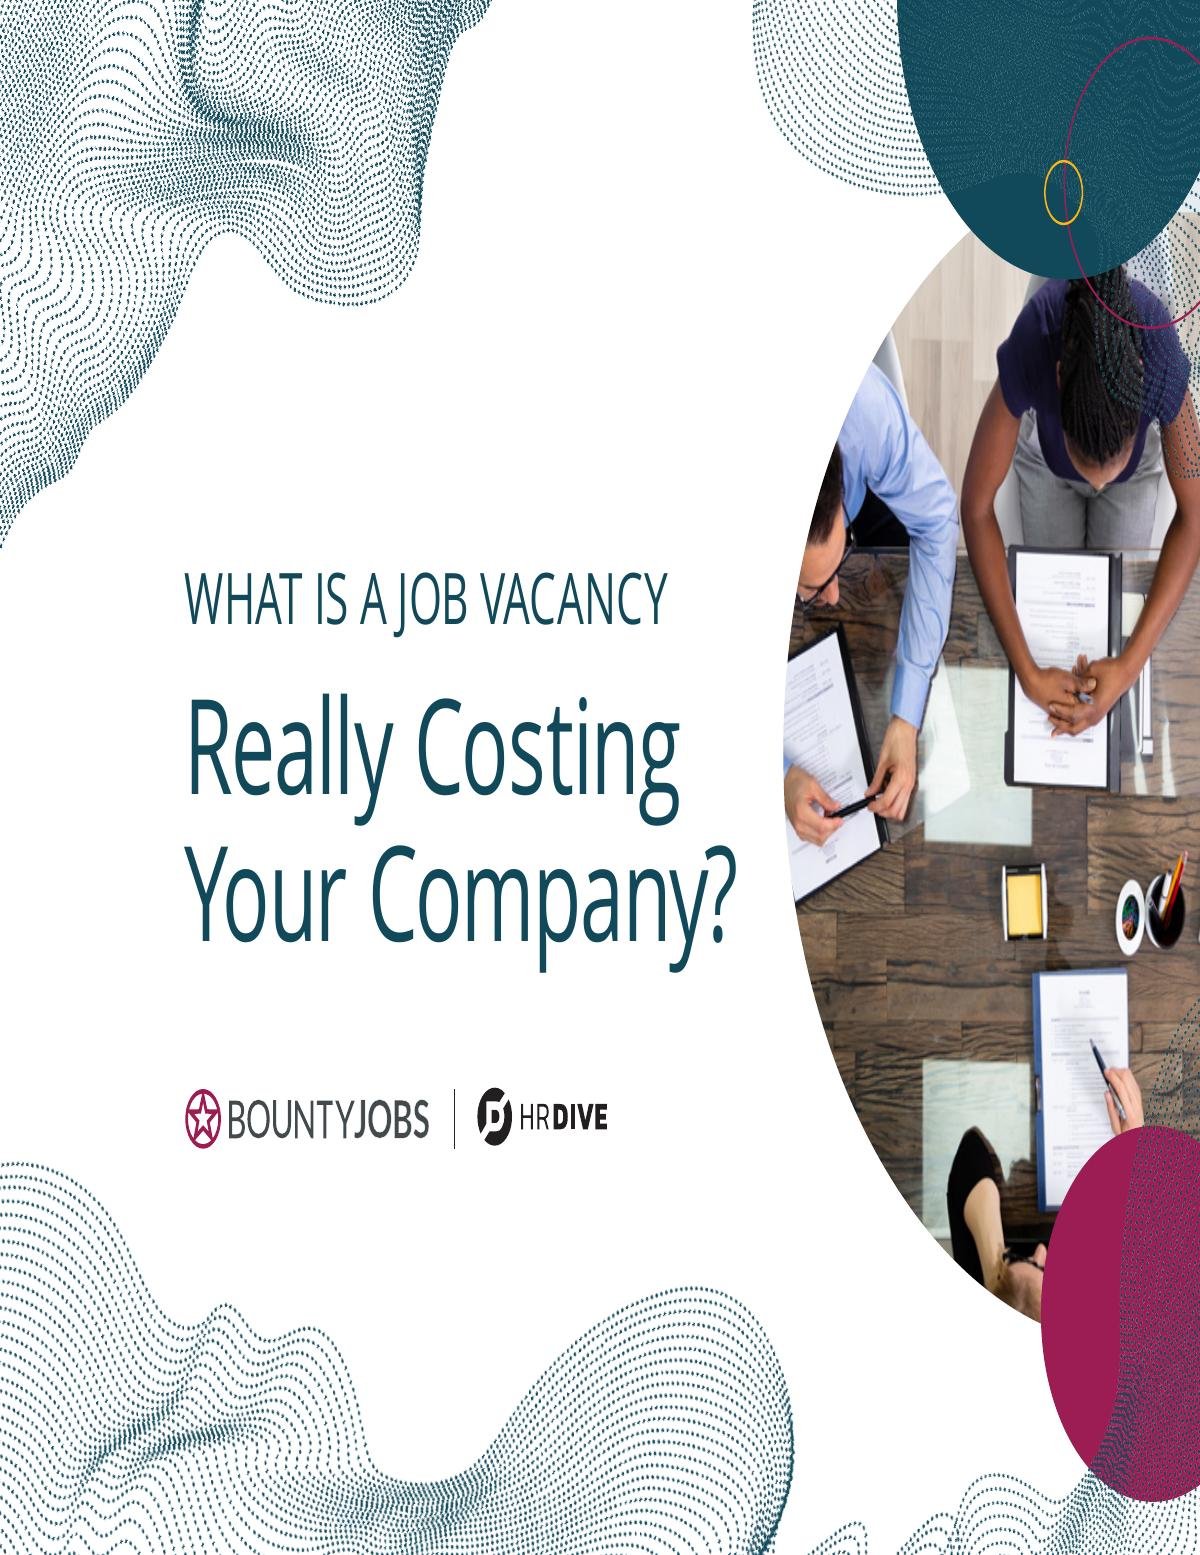 What Is a Job Vacancy Really Costing Your Company?